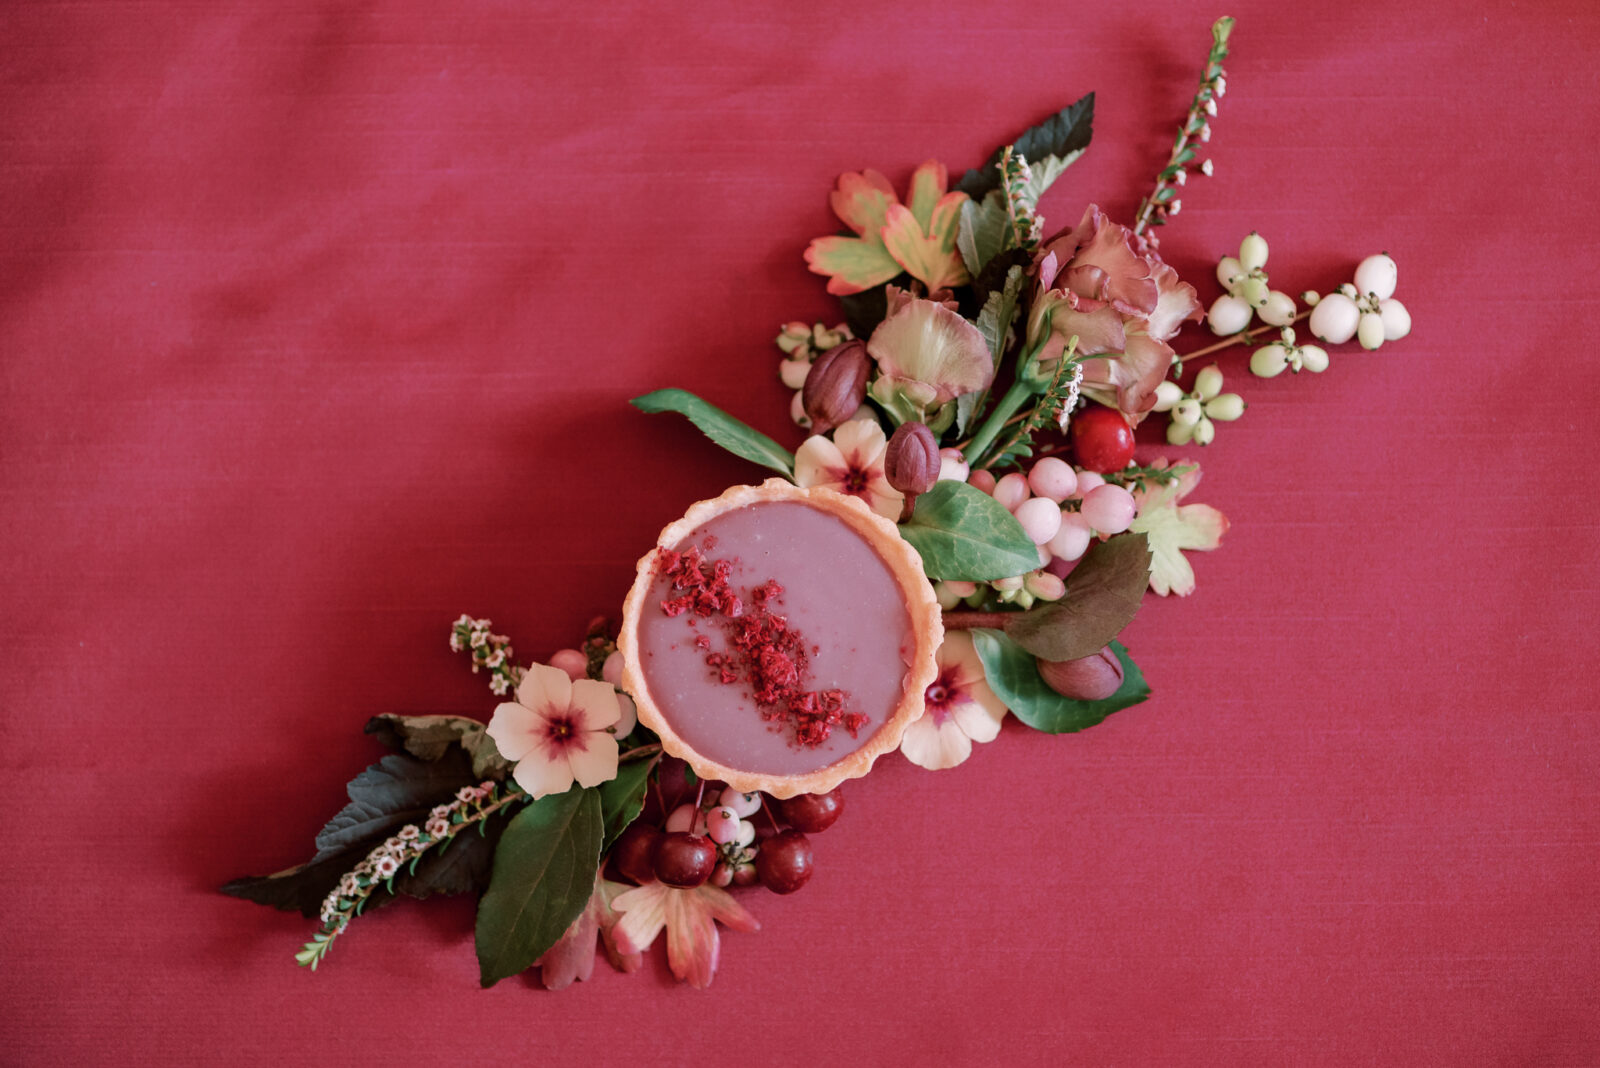 Fall Wedding Inspiration, Merlot and berry toned florals by Alexandra Victoria Rose, fall dessert inspiration by Lemonberry Pastries